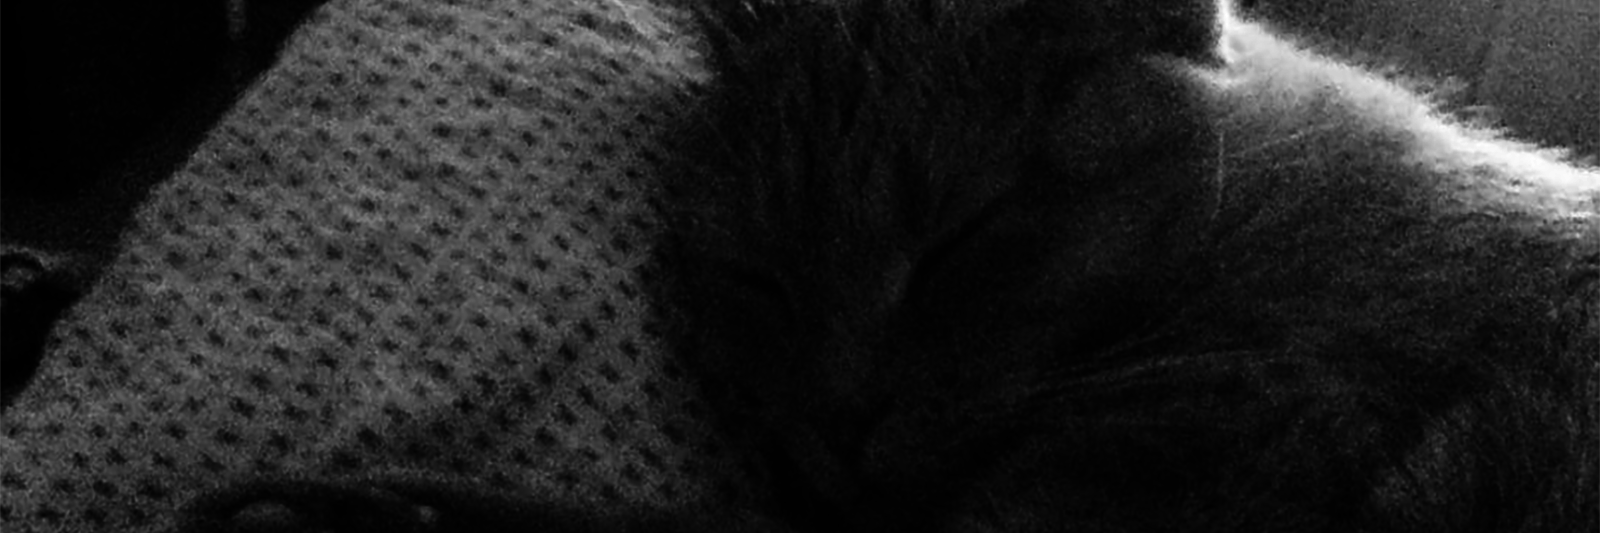 black and white image of contributor's cat lying on bed